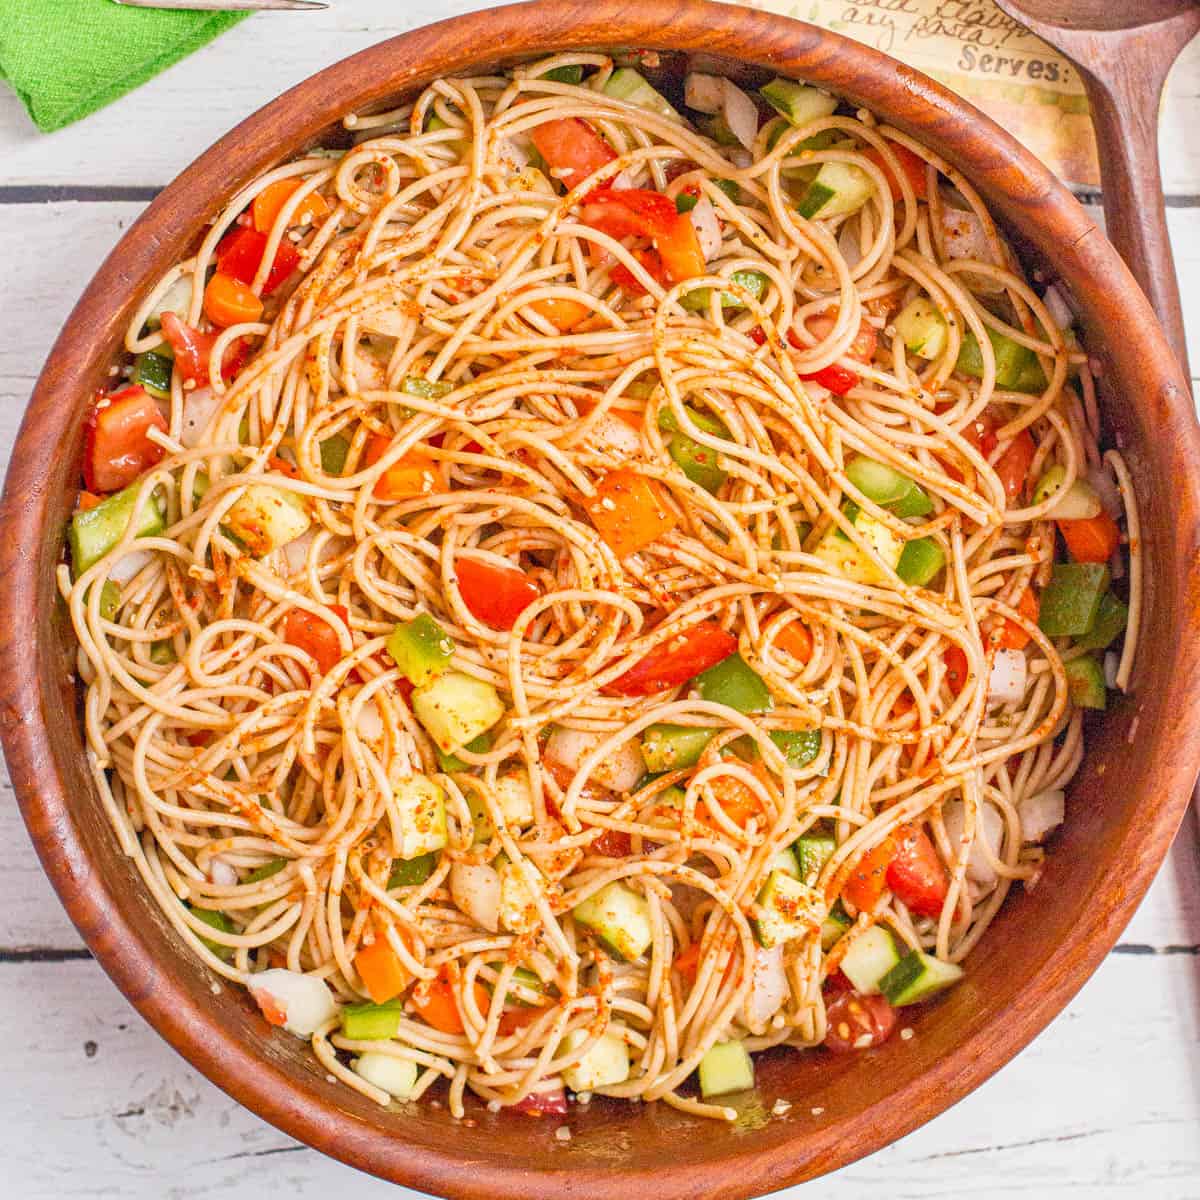 A tossed spaghetti salad with fresh veggies and dressing in a wooden bowl.